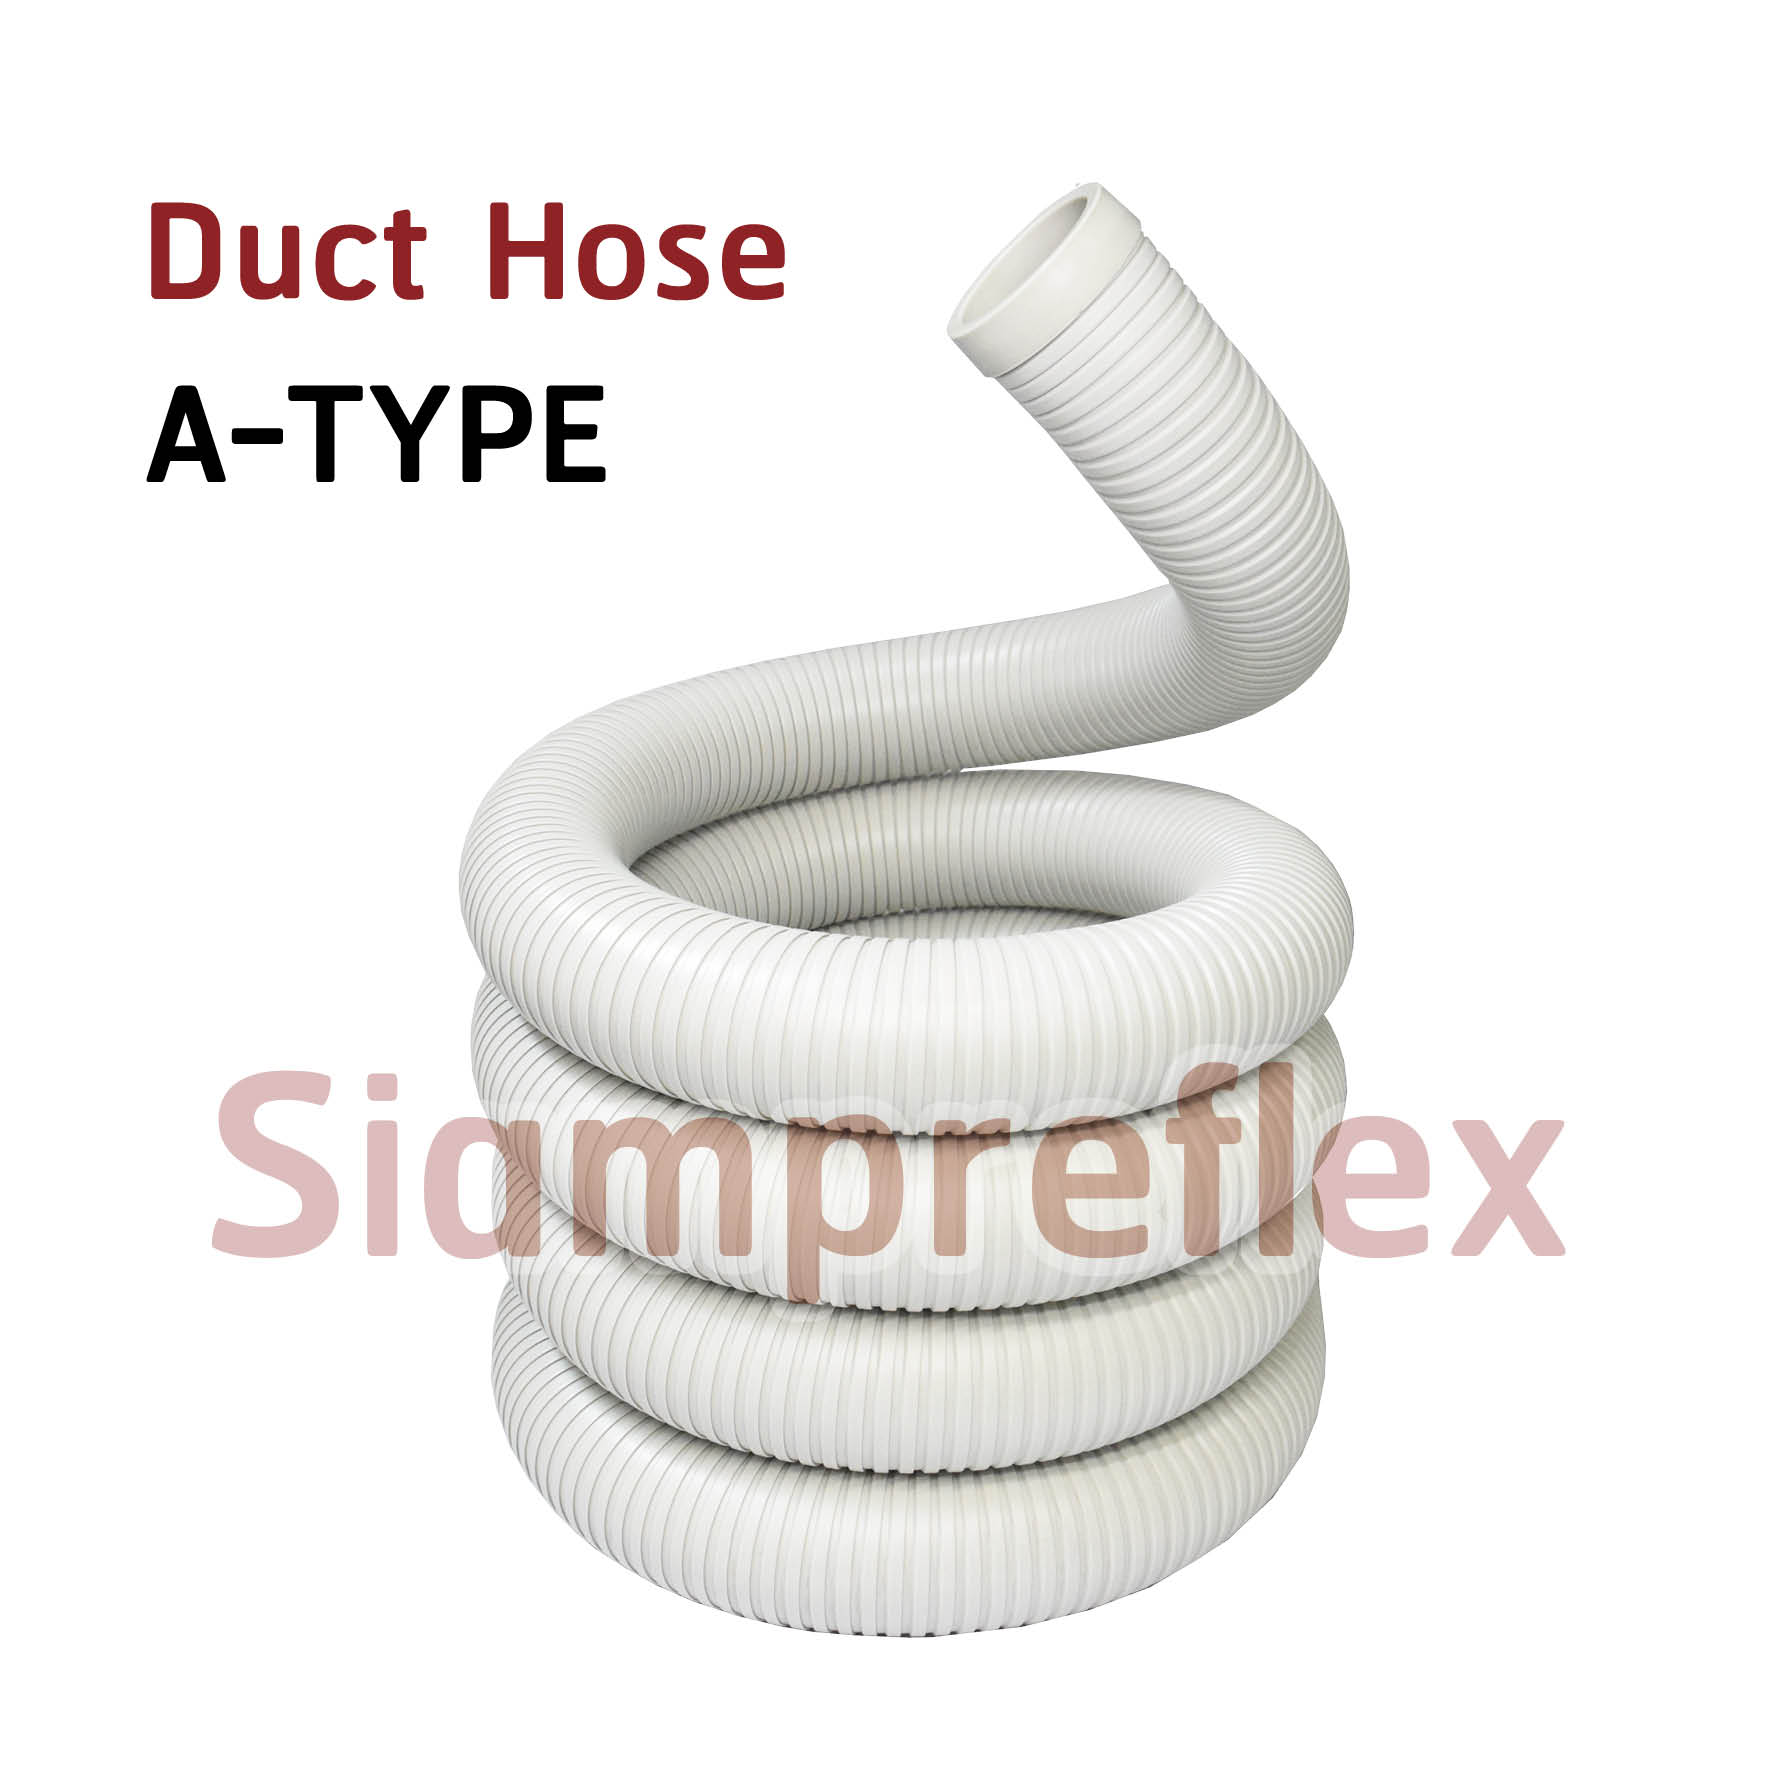 Duct Hose A-TYPE 